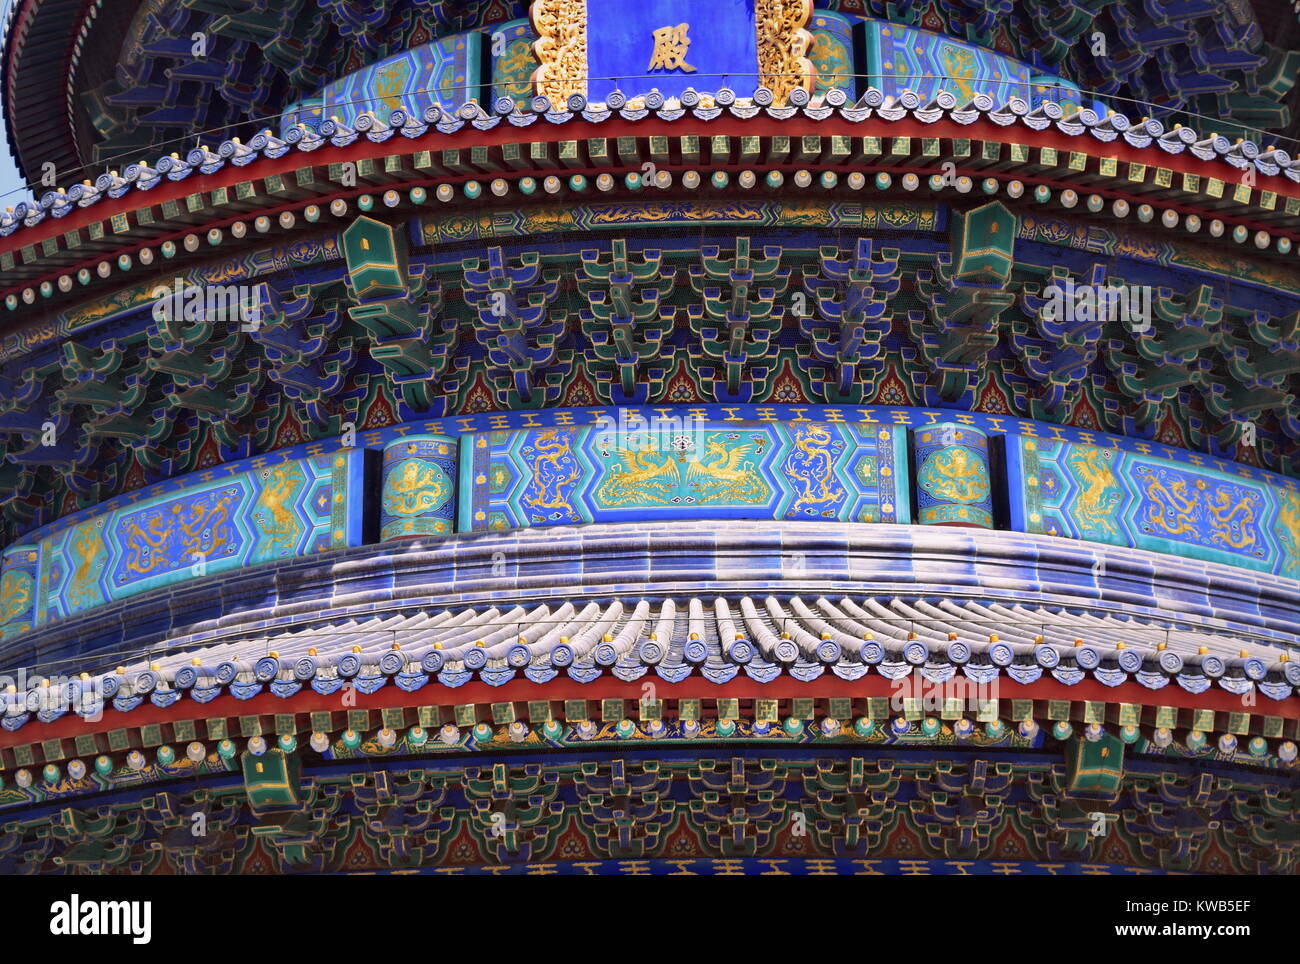 Beijing Temple of Heaven roof details and decorations close up on Chinese traditional architecture Stock Photo